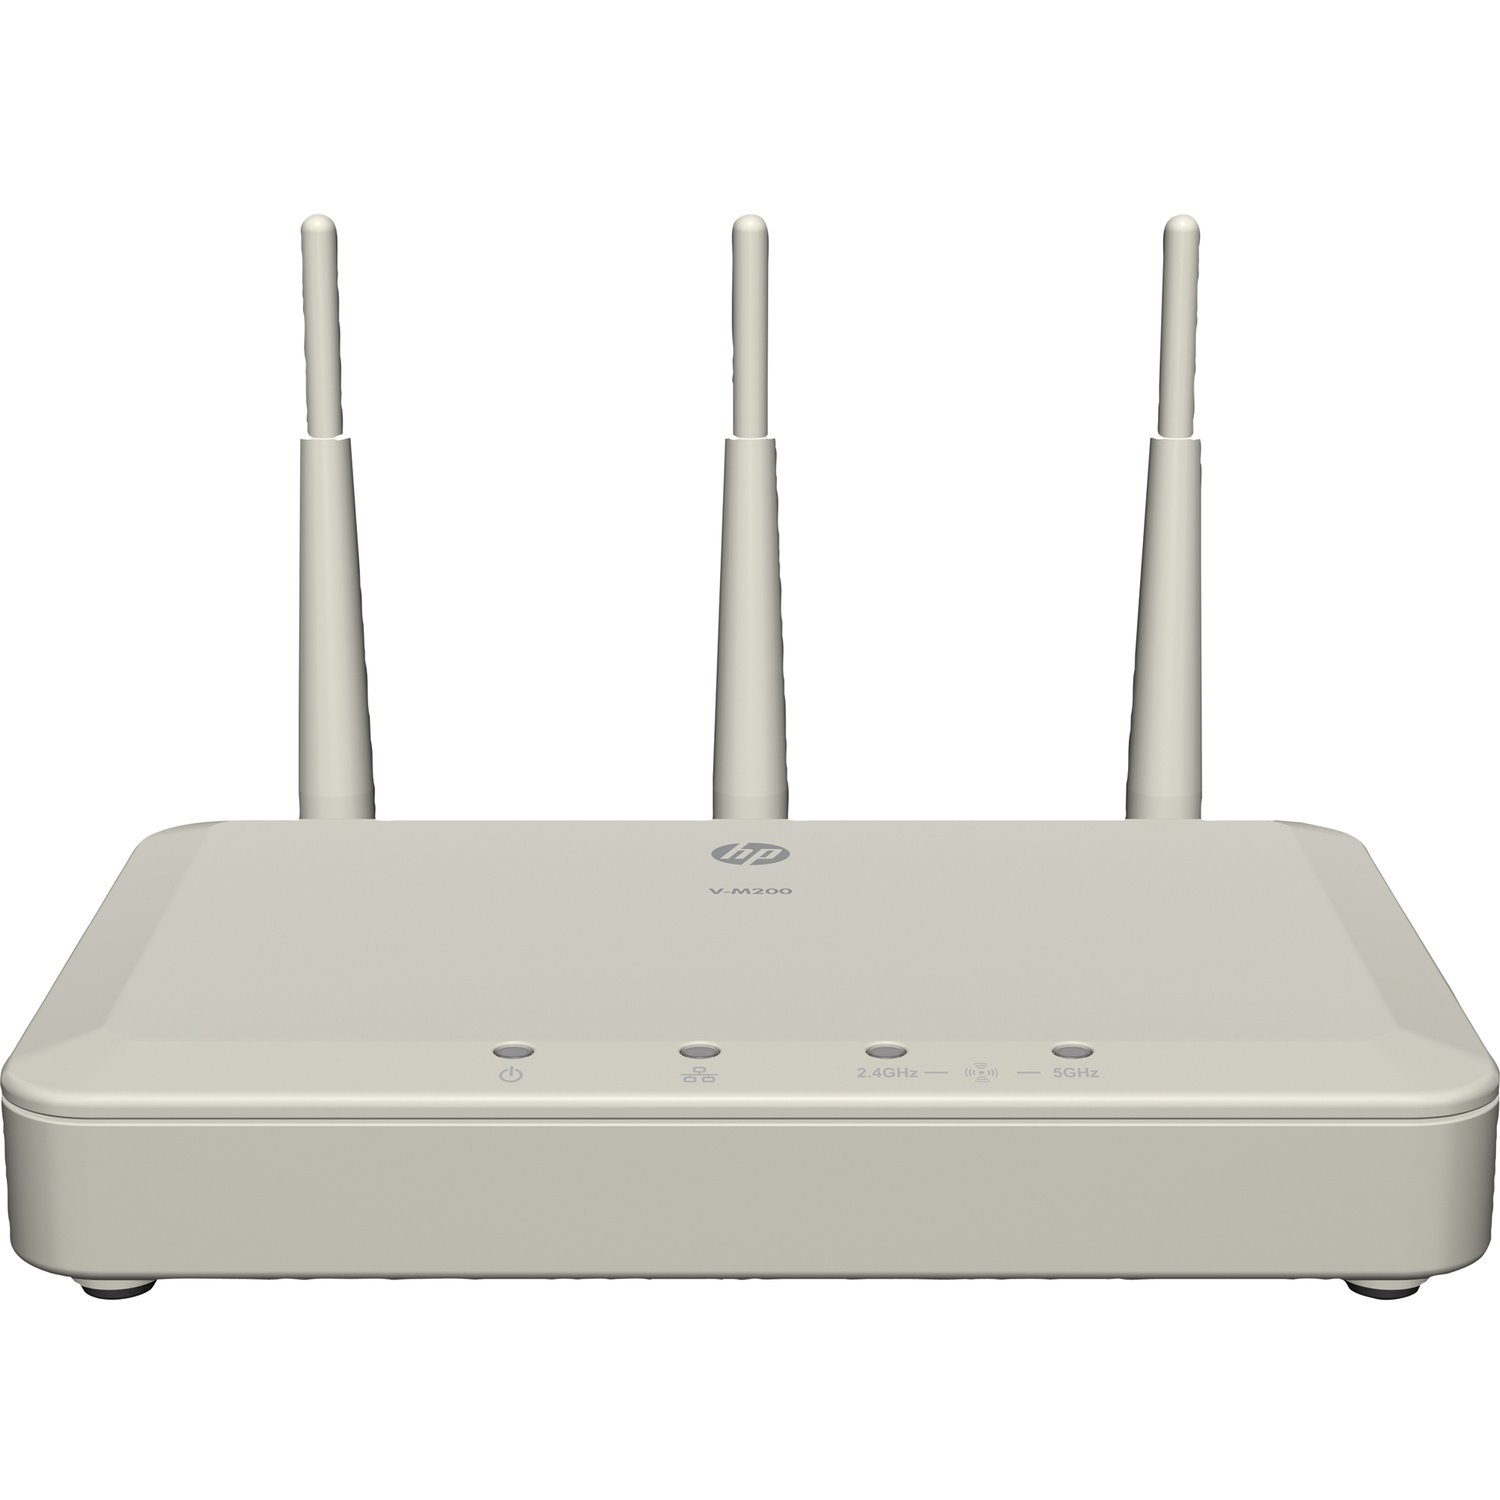 HPE Sourcing V-M200 IEEE 802.11n 300 Mbit/s Wireless Access Point